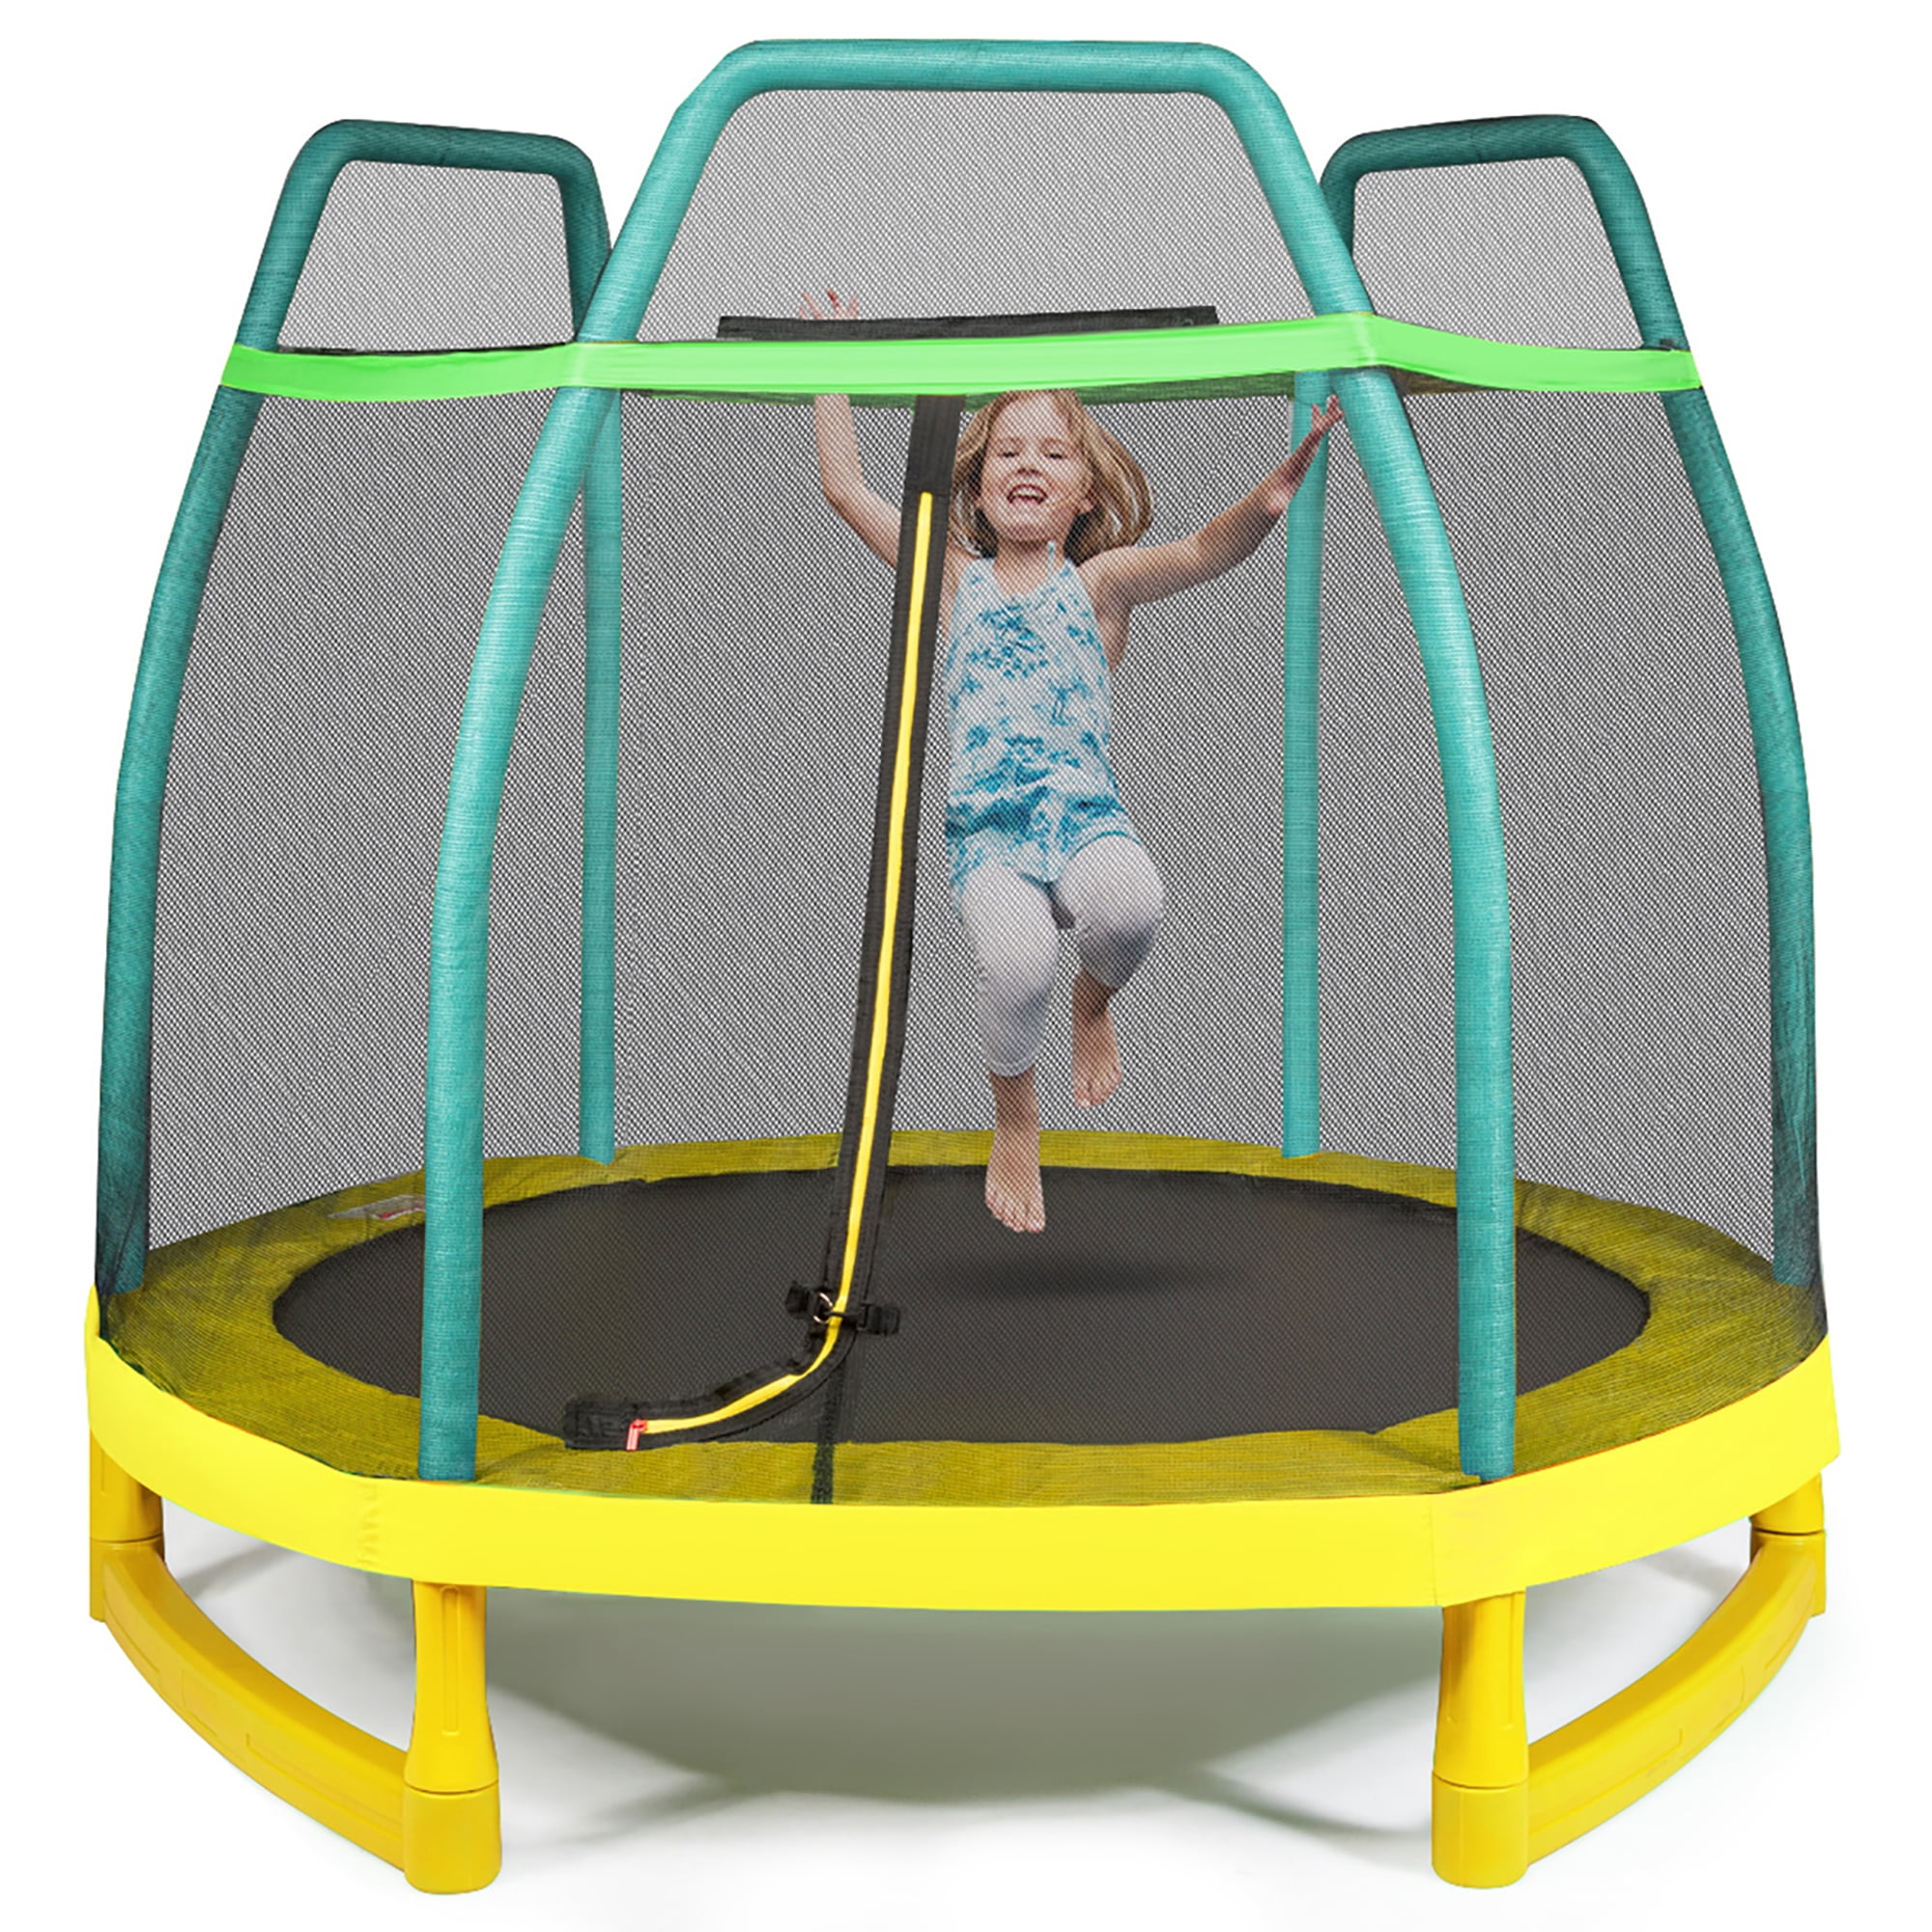 Ship from USA Directly Heavy Duty Steel Frame,Mini Trampoline for Indoor//Outdoor,Great Gifts for Kids Vibolaa 10 Ft Kids Trampoline w//Safety Enclosure Net,Spring Cover Padding